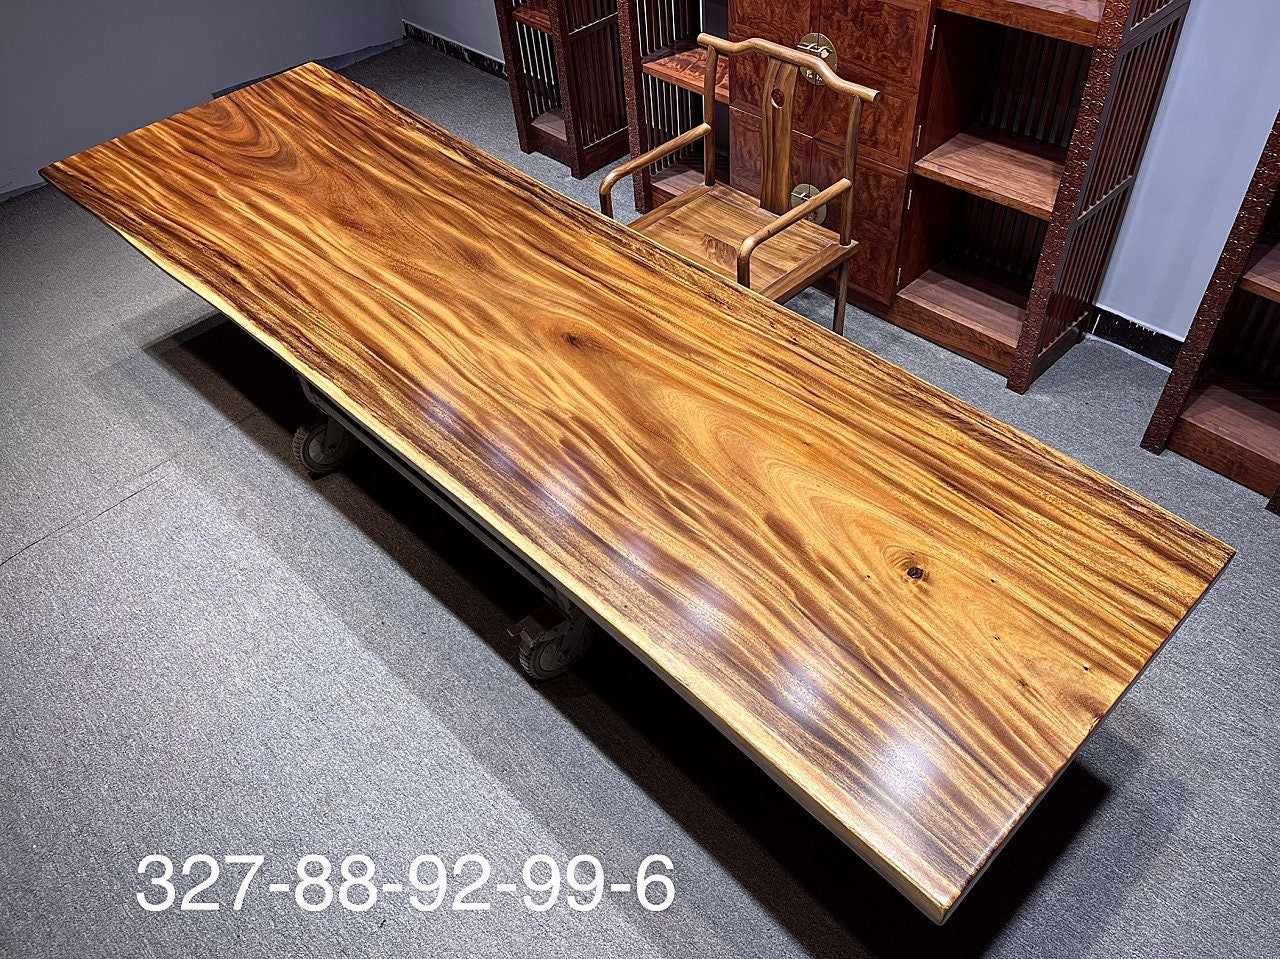 Solid wood table, Live Edge Table, Live Edge Furniture, Walnut Dining Table, Live Edge Dining Table